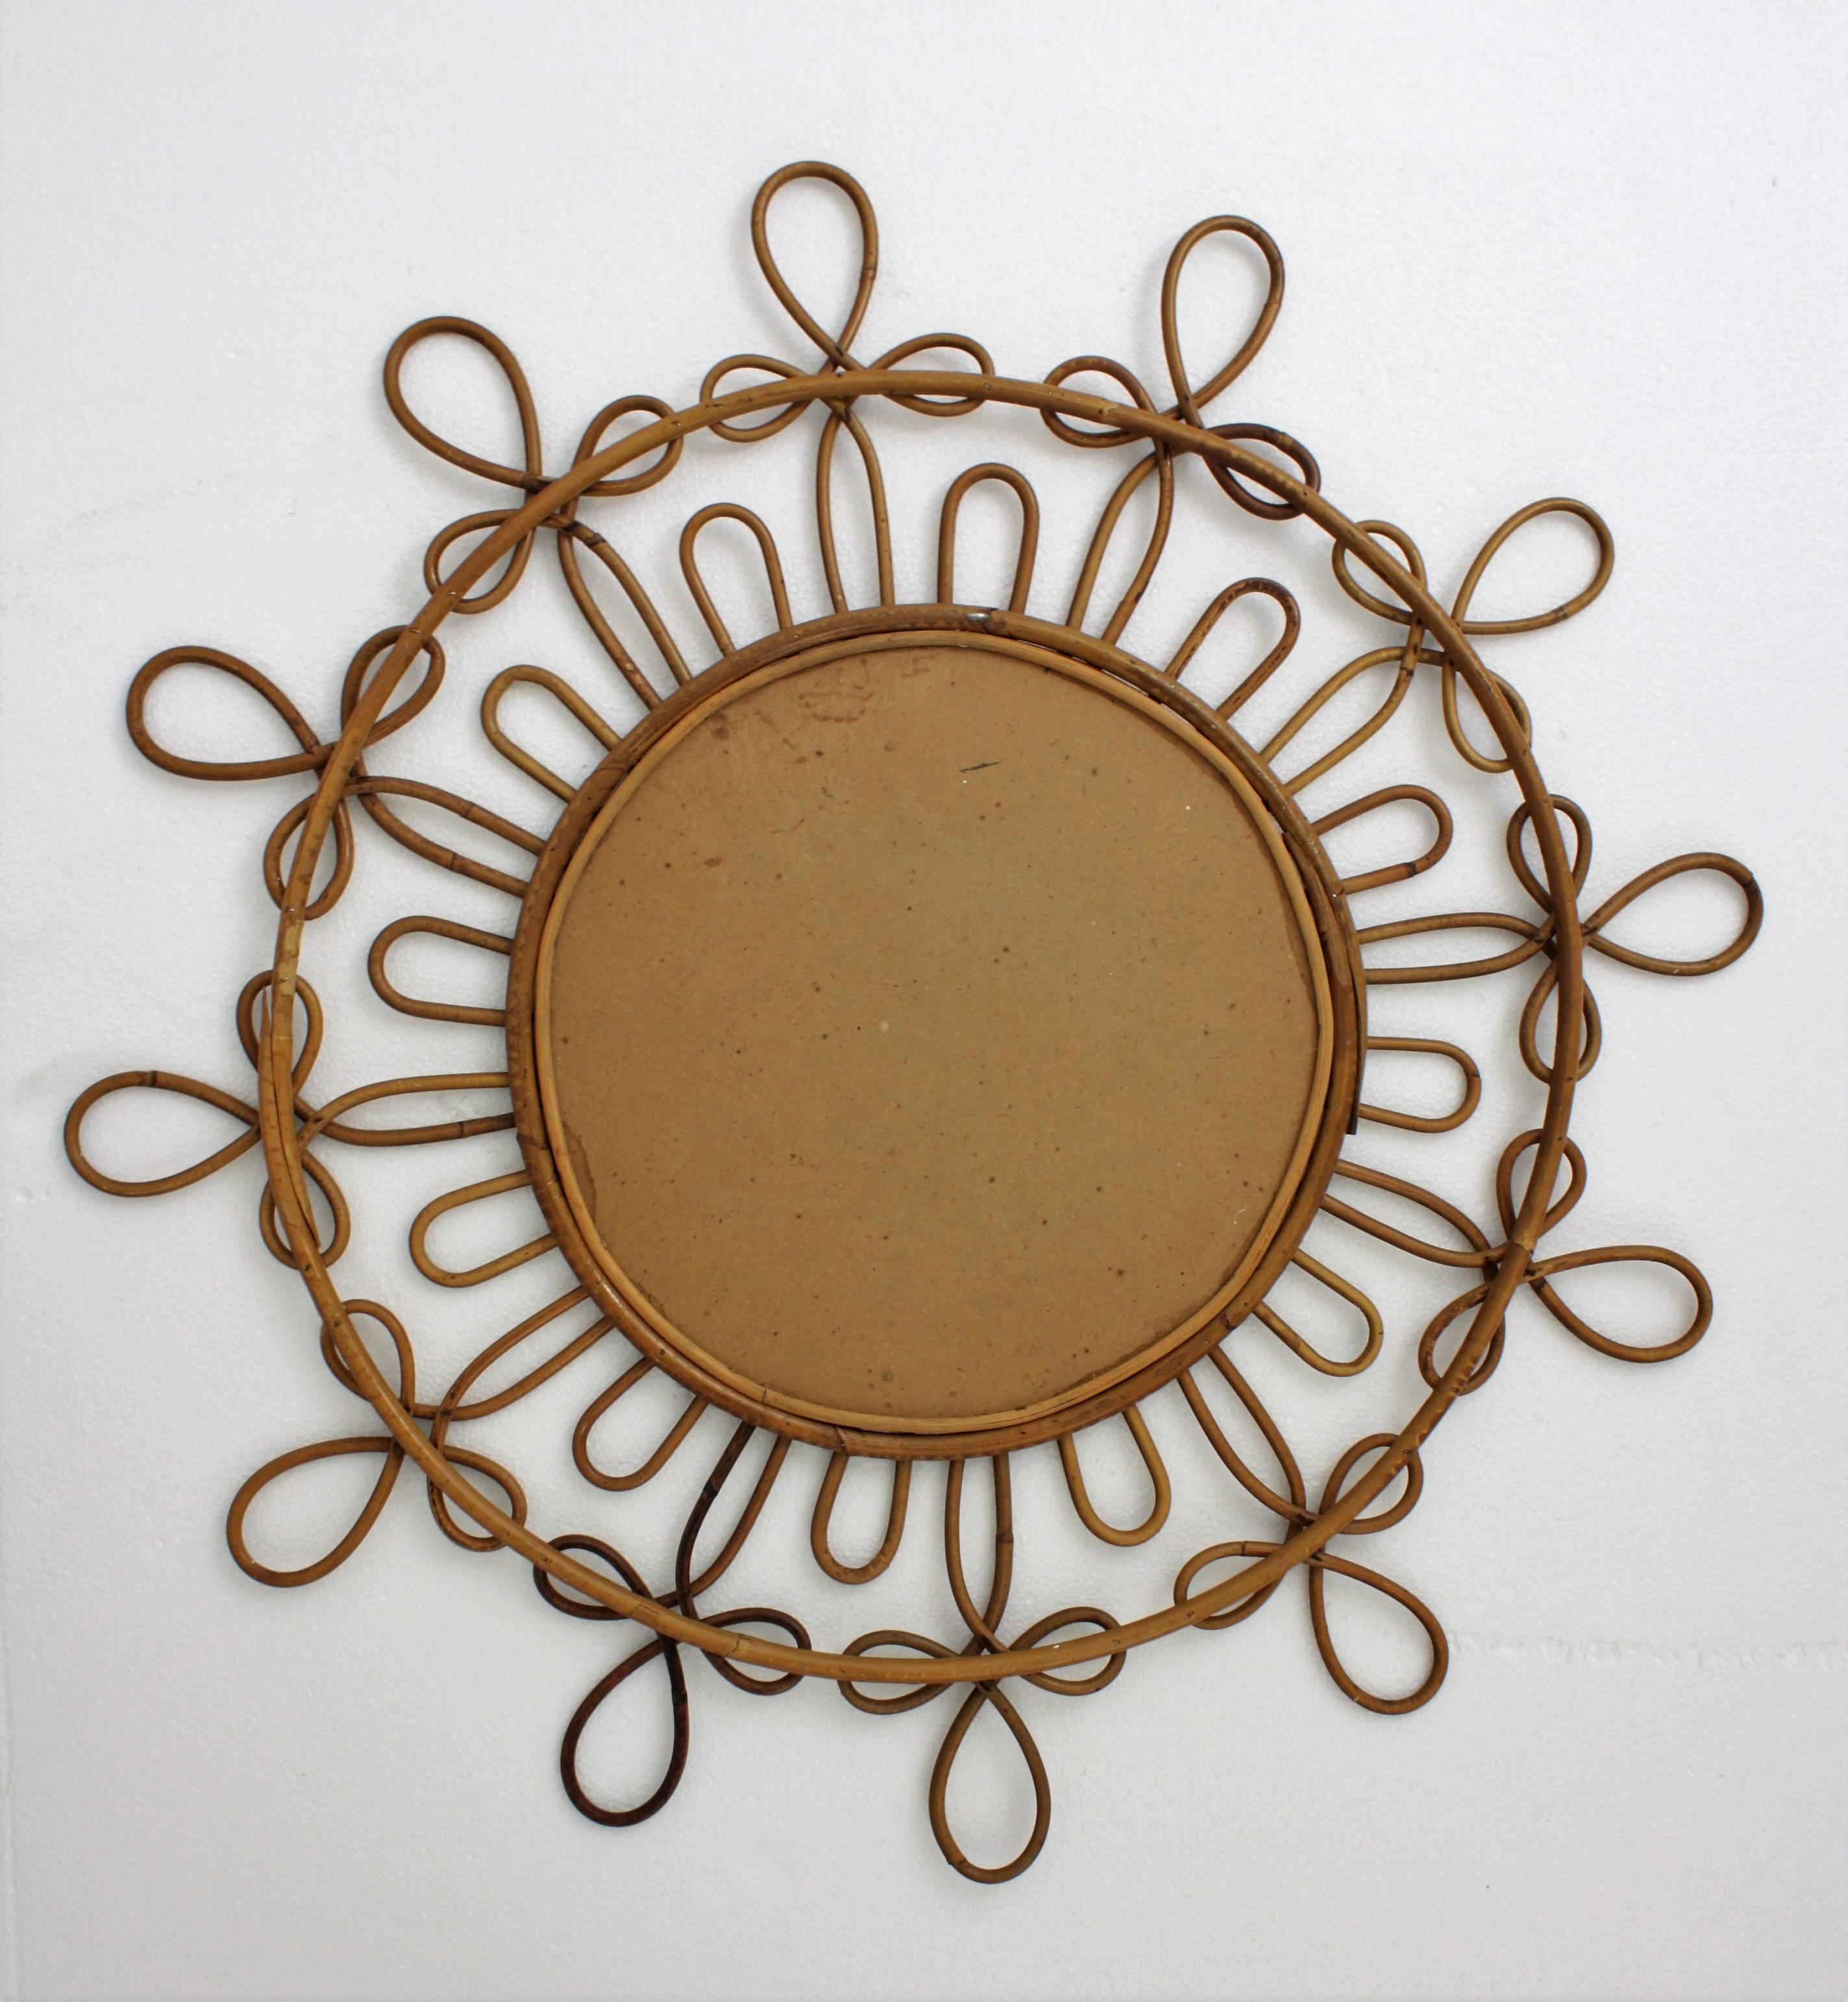 Spanish Rattan and Wicker Flower Burst Mirror with Loops and Pyrography Details 3